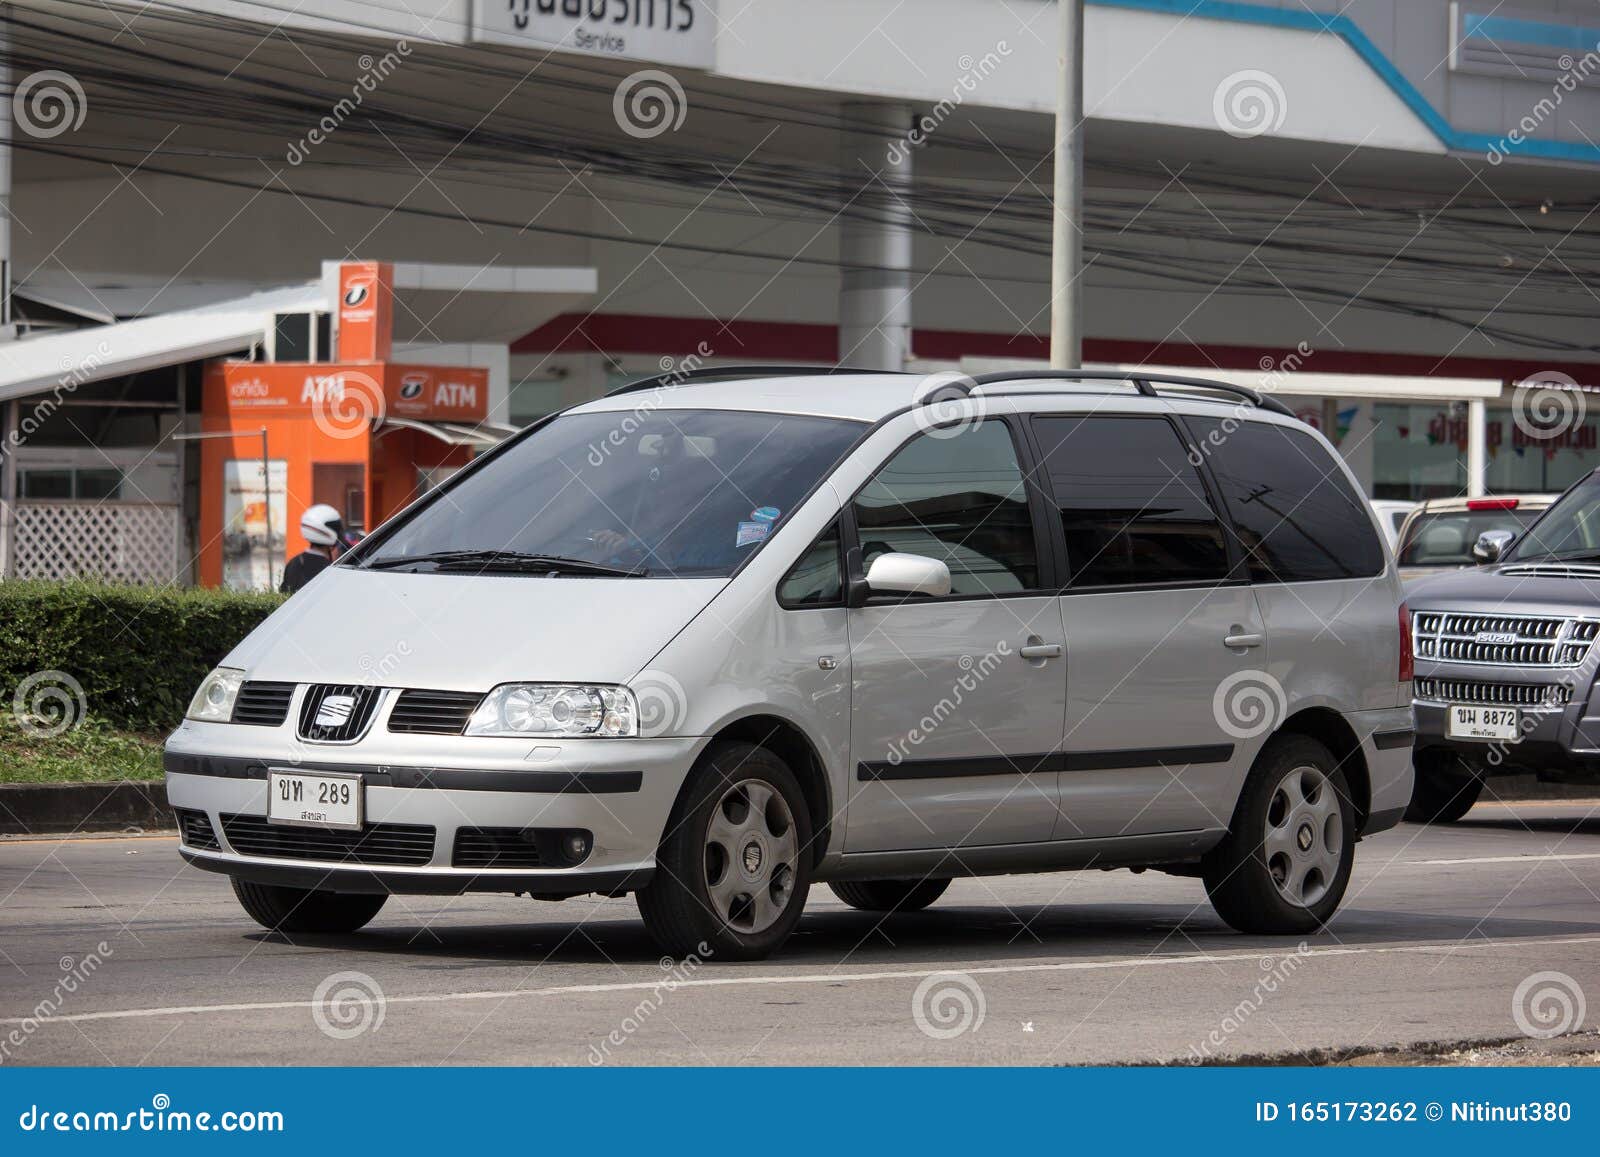 Seat Alhambra as car subscription